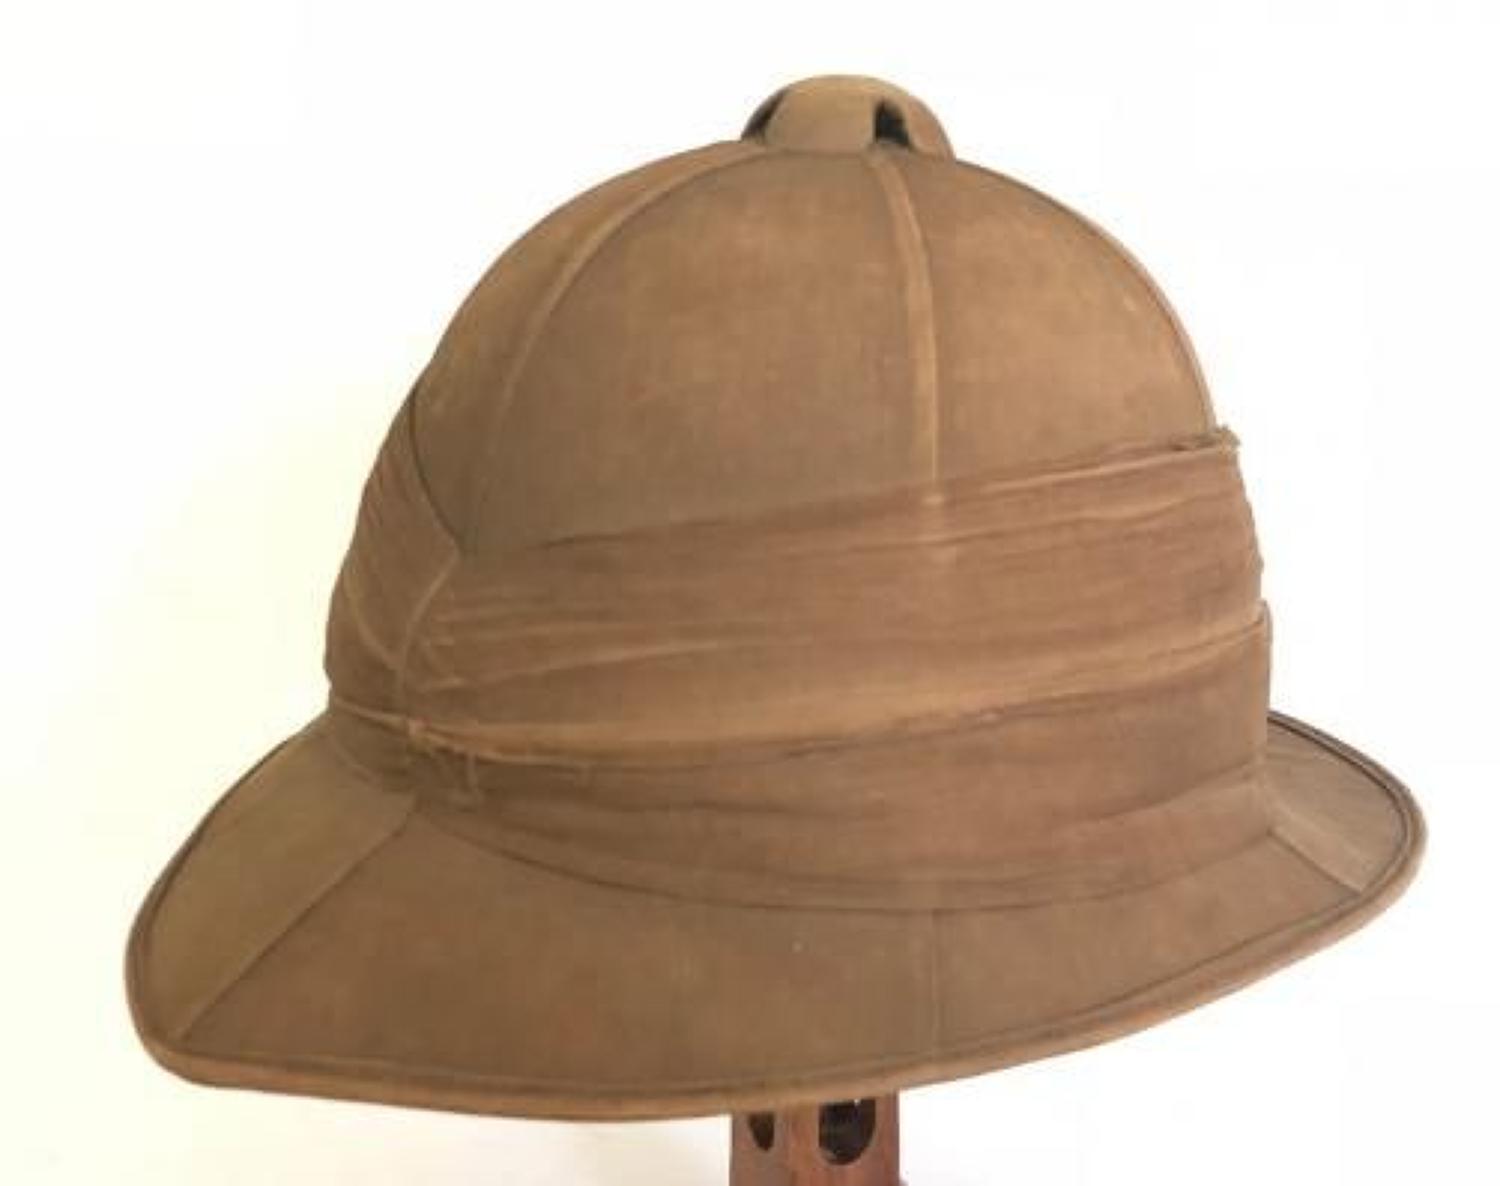 WW1 Period 1917 Other Rank's Wolseley Pattern Foreign Service Helmet